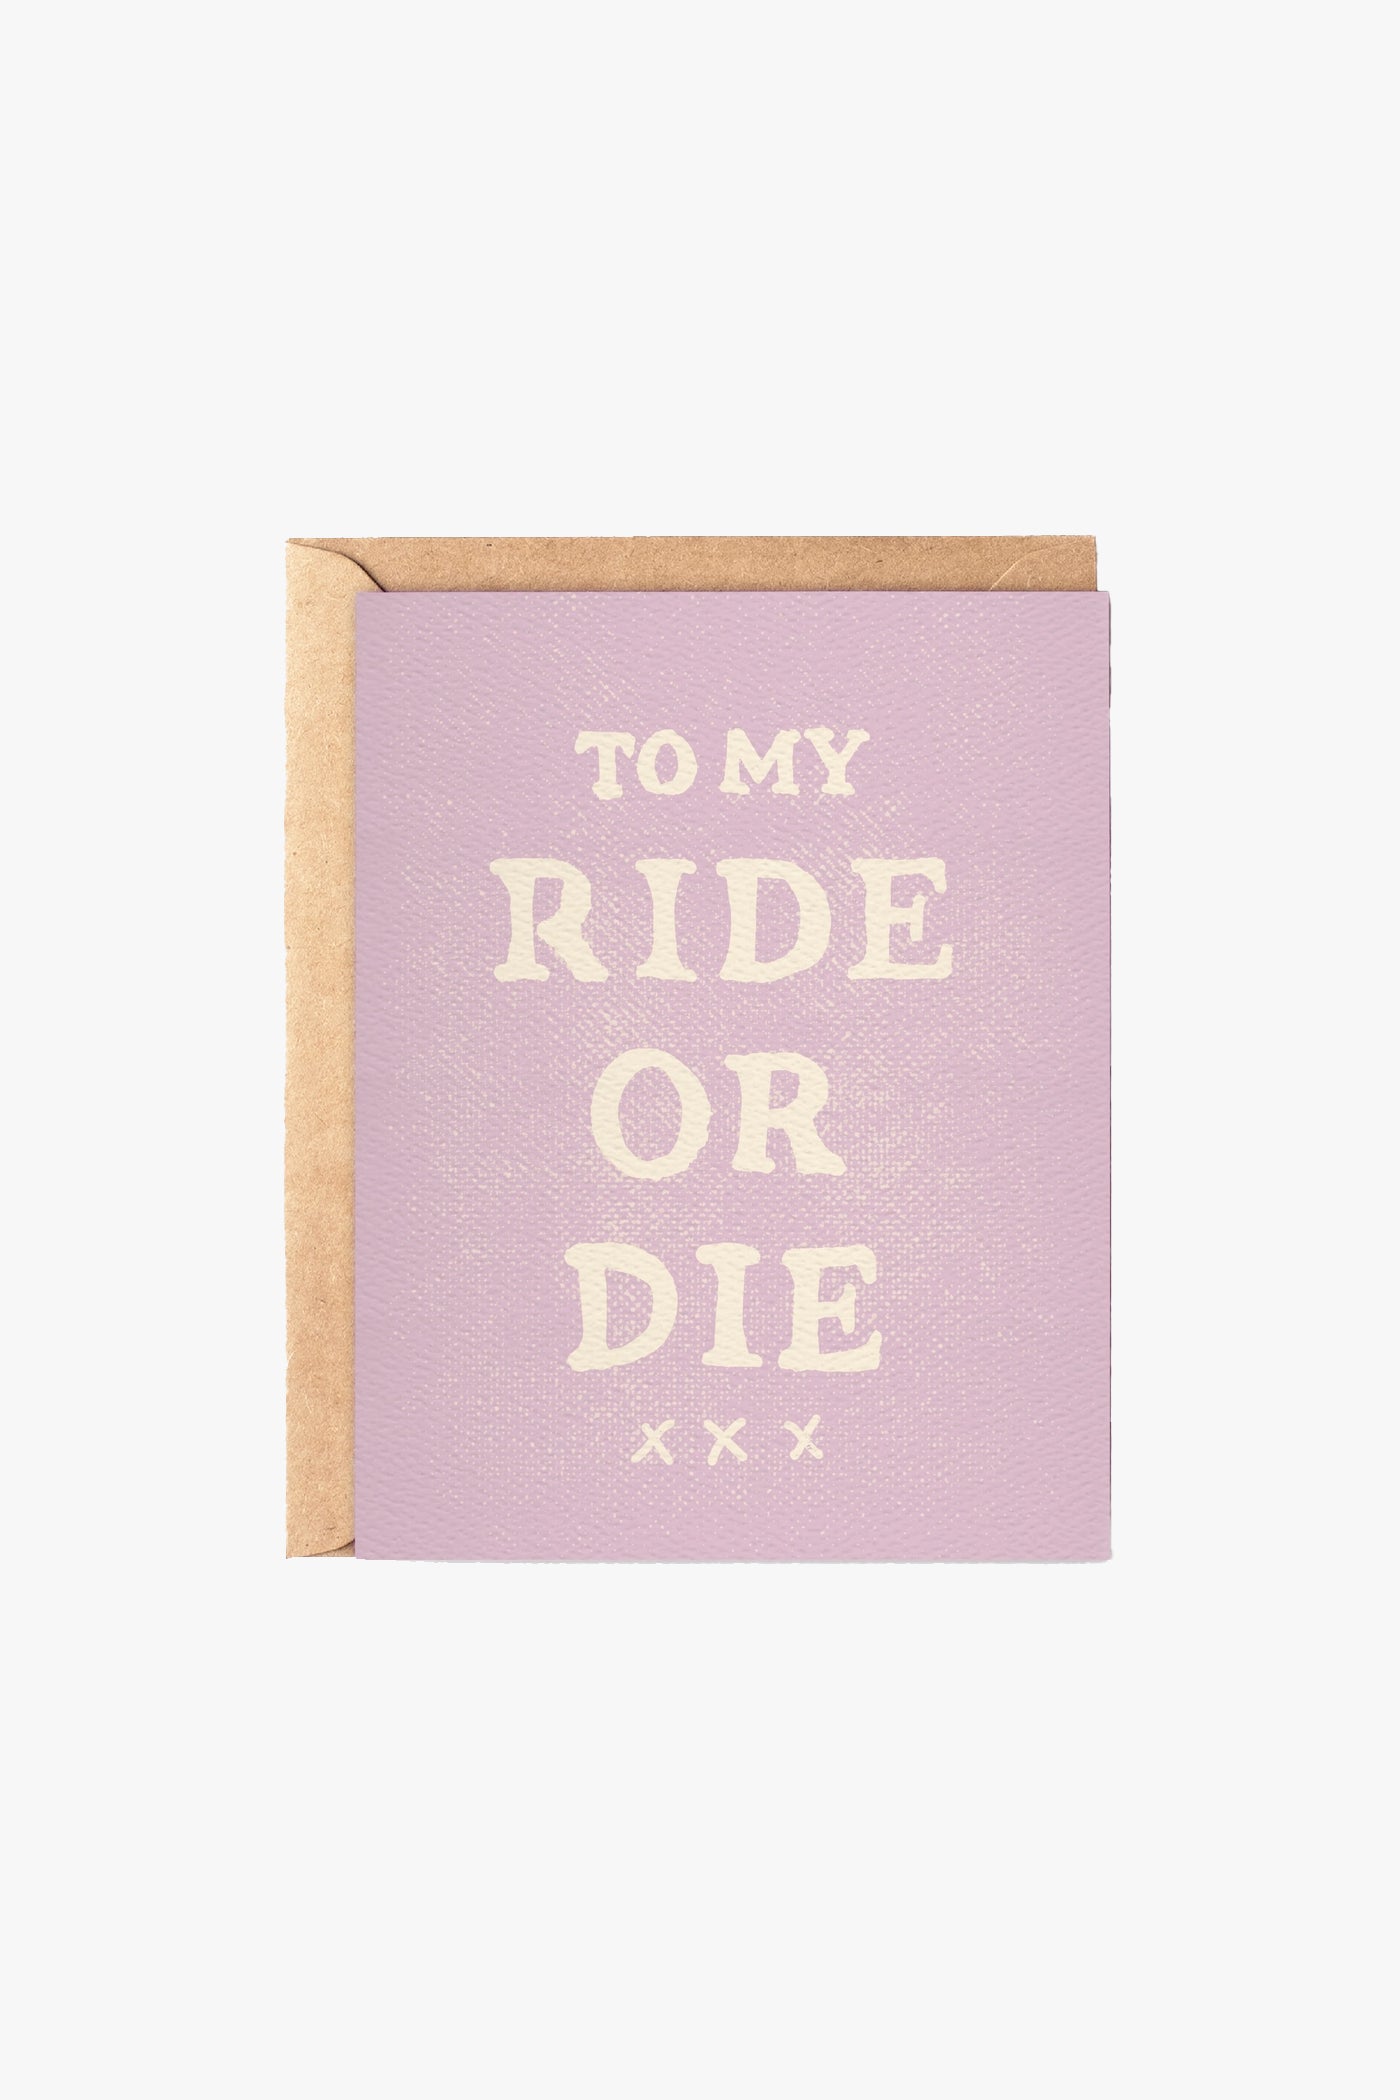 Daydream Prints To My Ride or Die Card